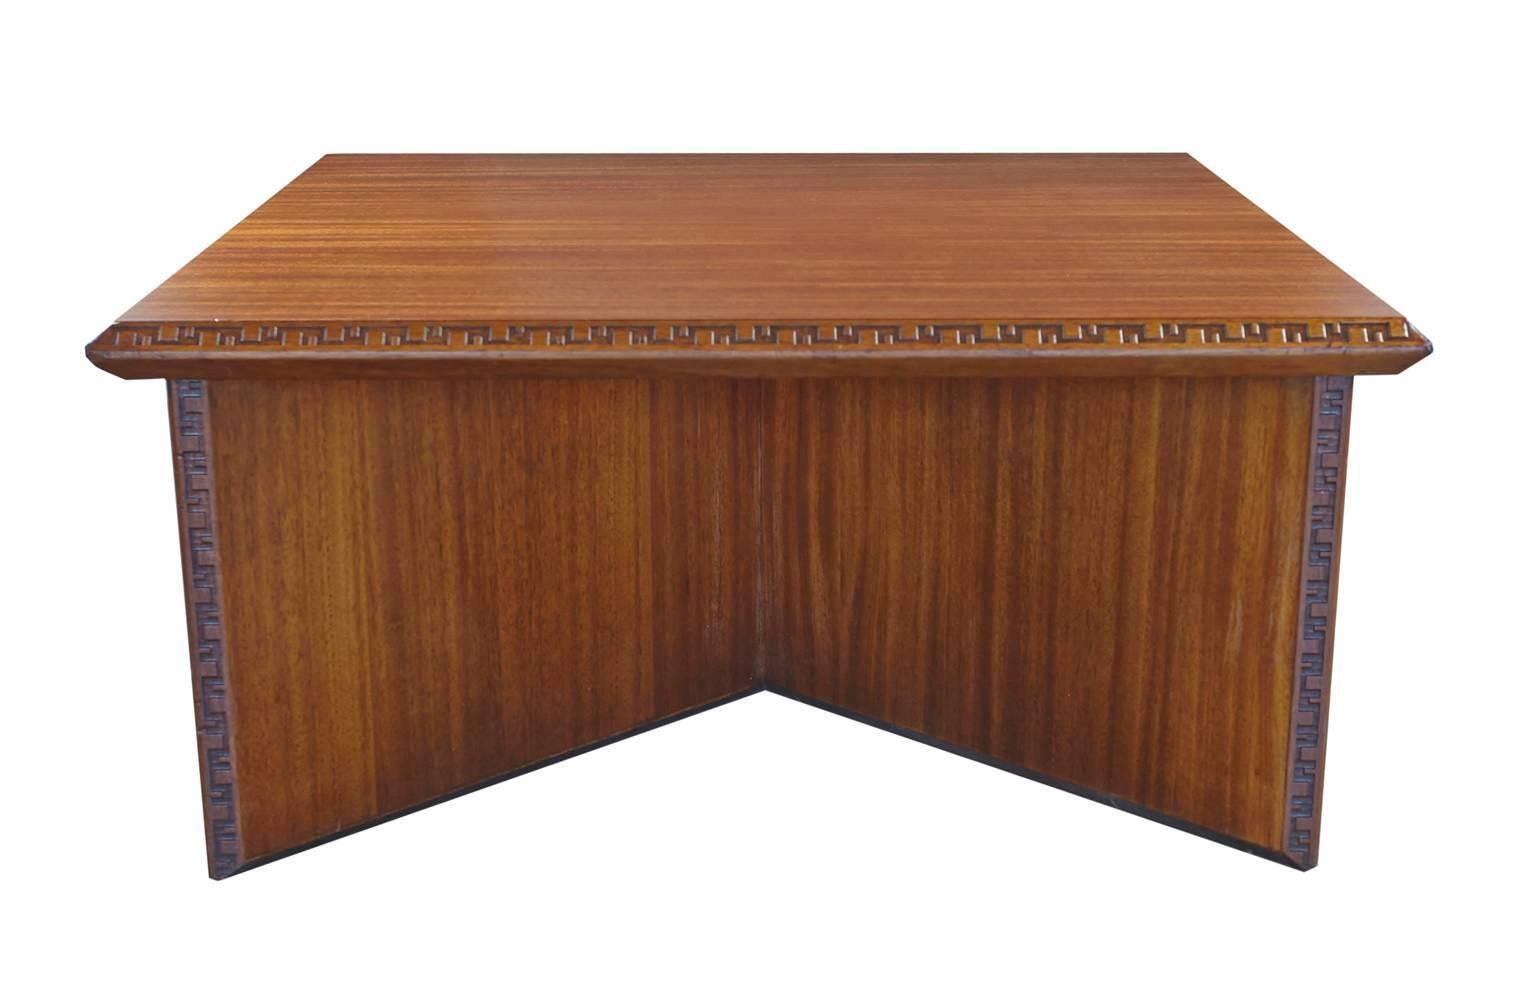 Mahogany coffee table designed by Frank Lloyd Wright for Heritage Henredon,
from the Taliesin collection. This beautiful table is signed Frank Lloyd Wright
Heritage Henredon on the bottom. 
 